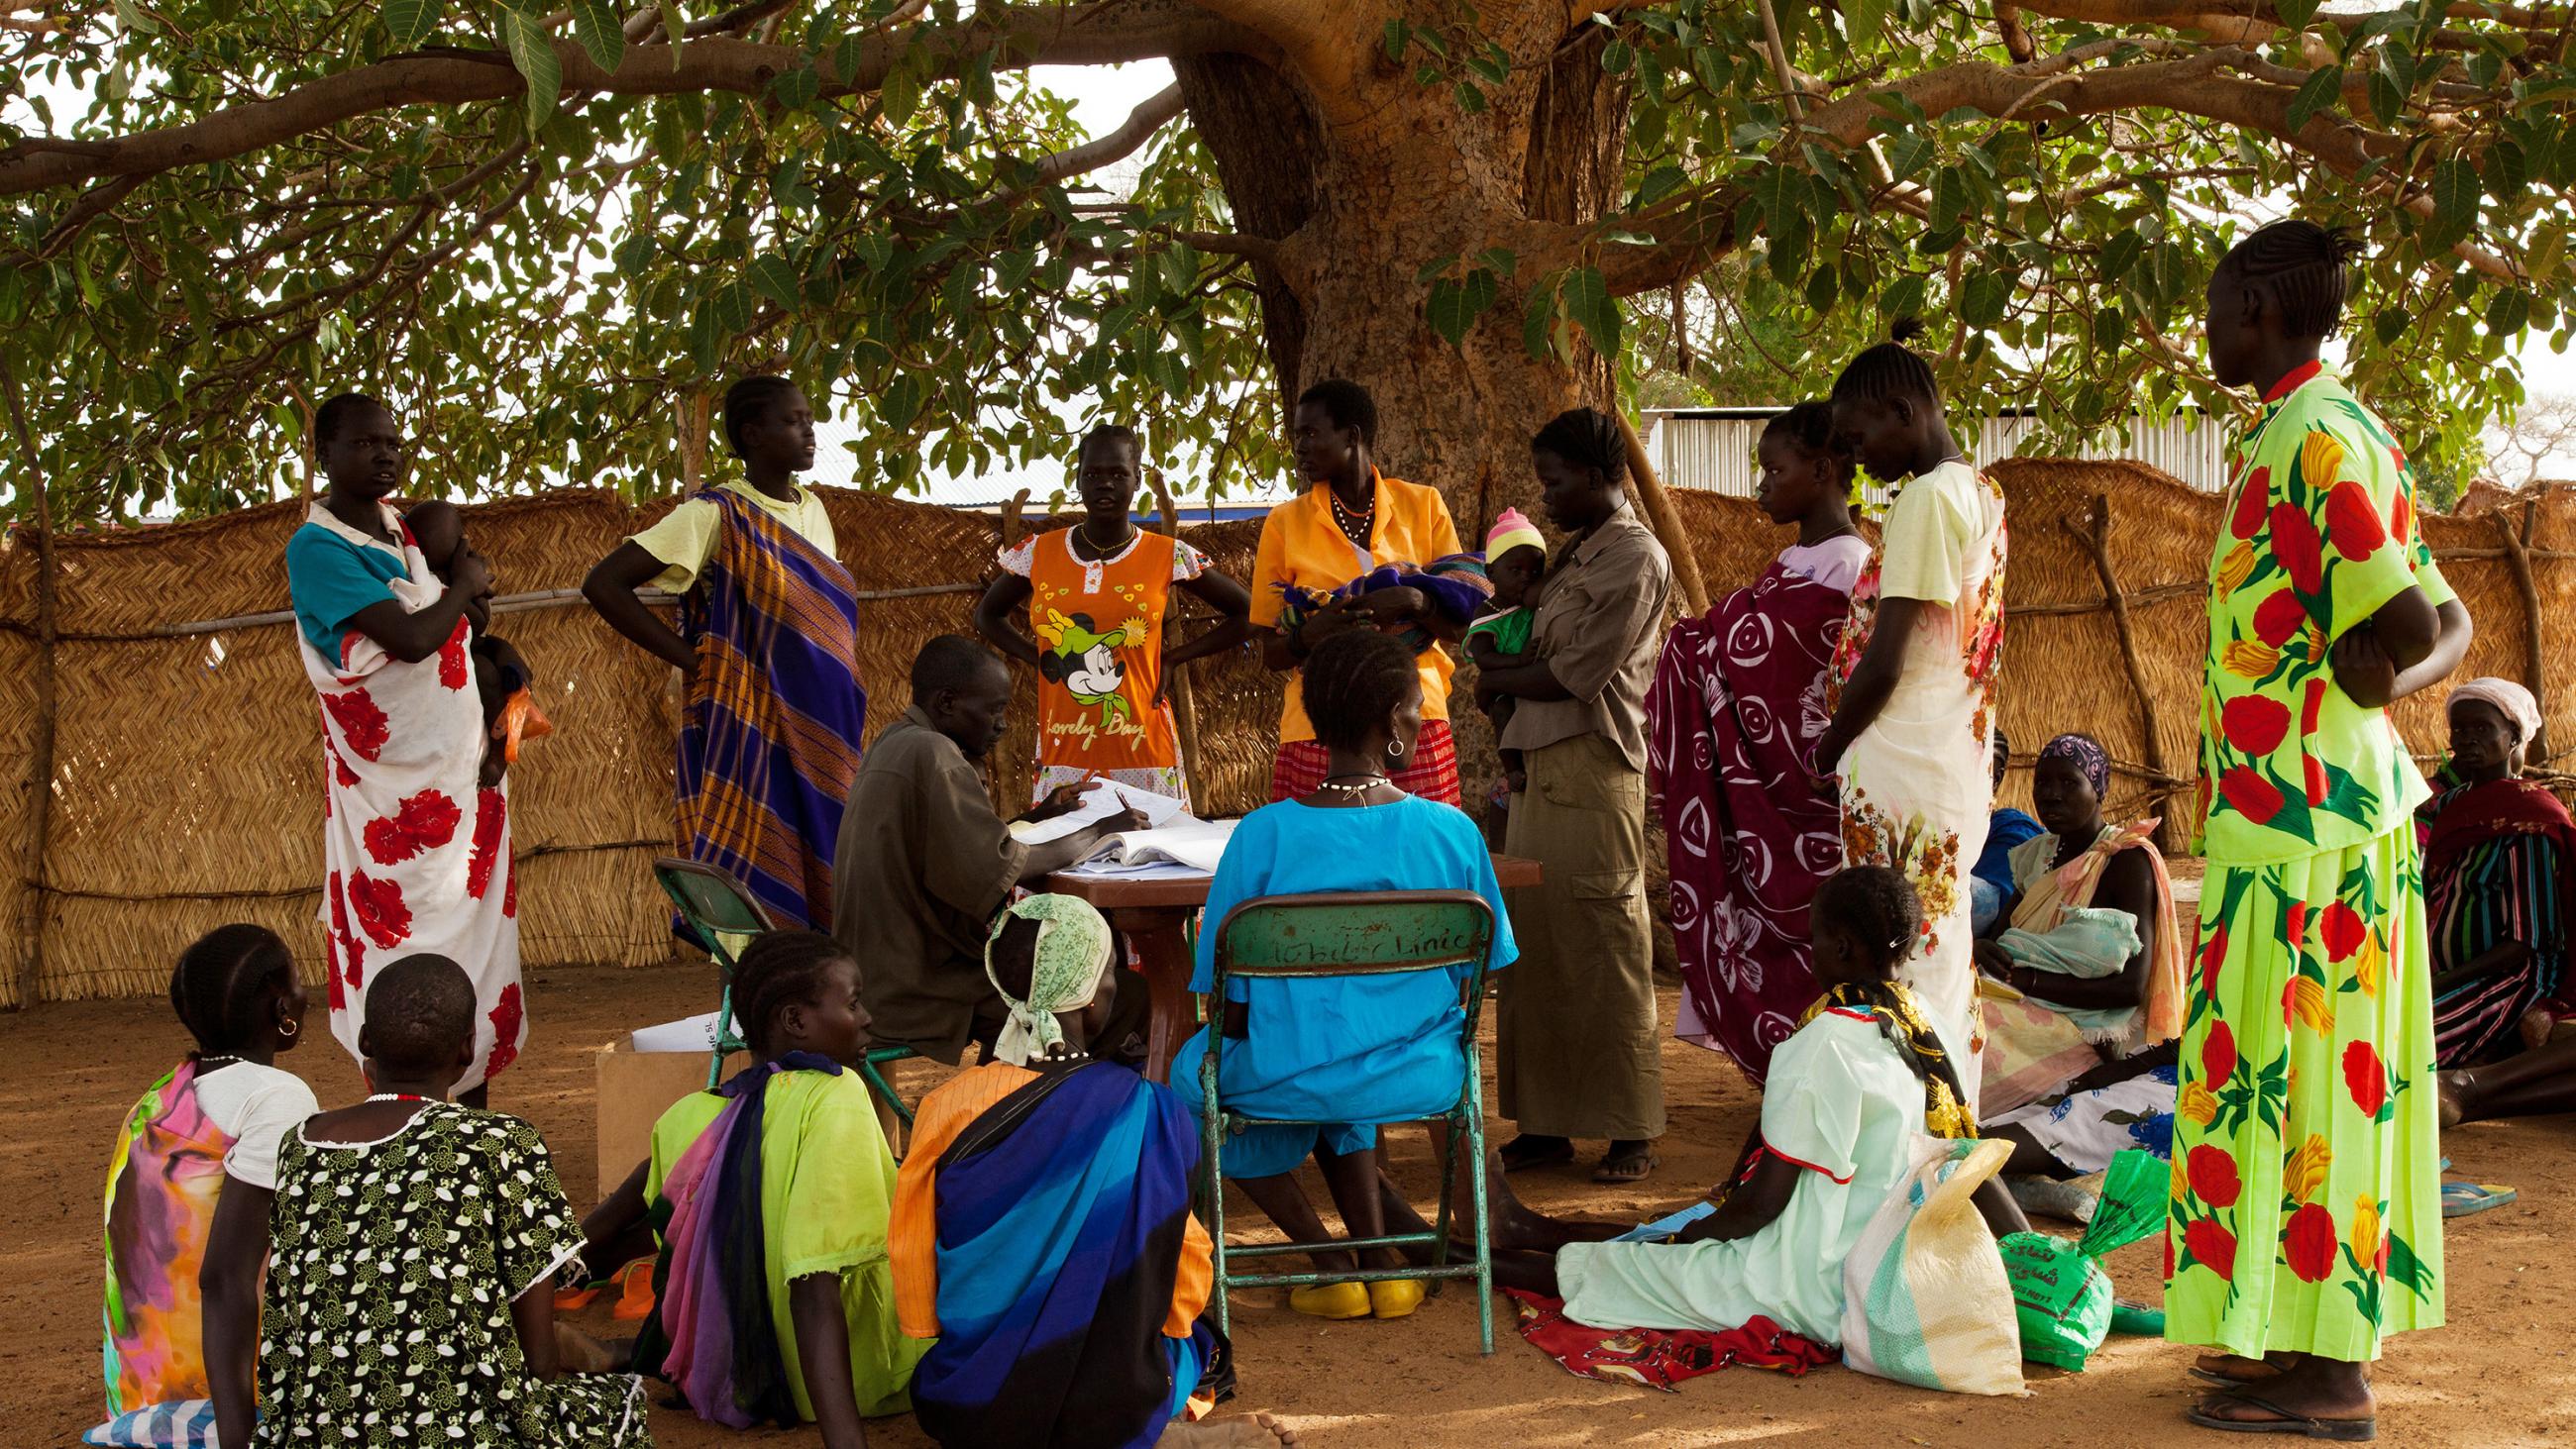 Picture shows a group of people, many of whom are wearing brightly coloured clothing, gathered under a tree, some sitting, some standing. 